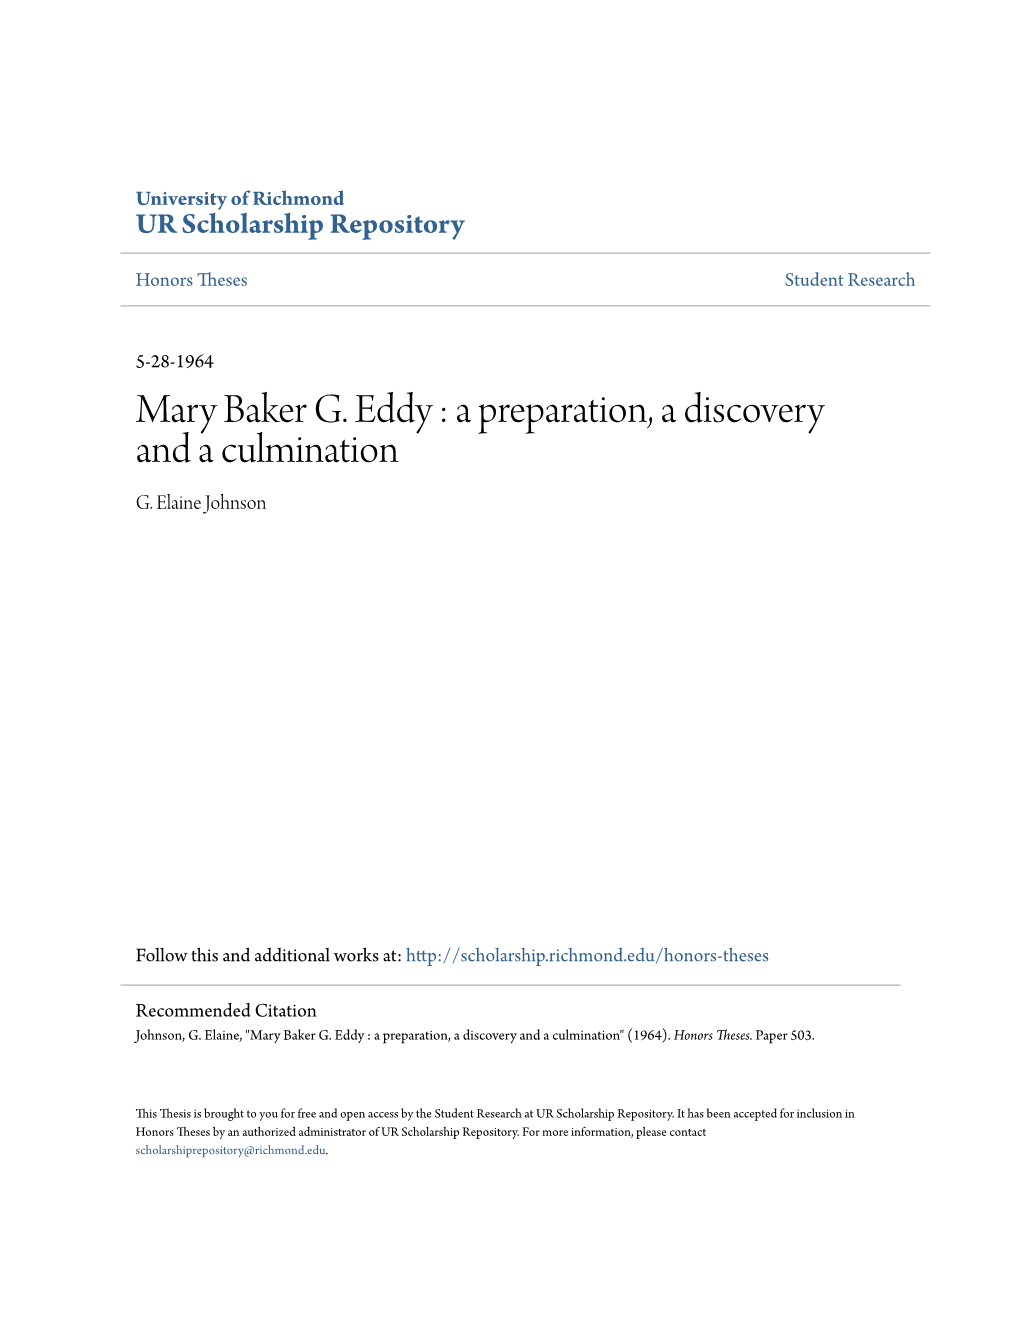 Mary Baker G. Eddy : a Preparation, a Discovery and a Culmination G